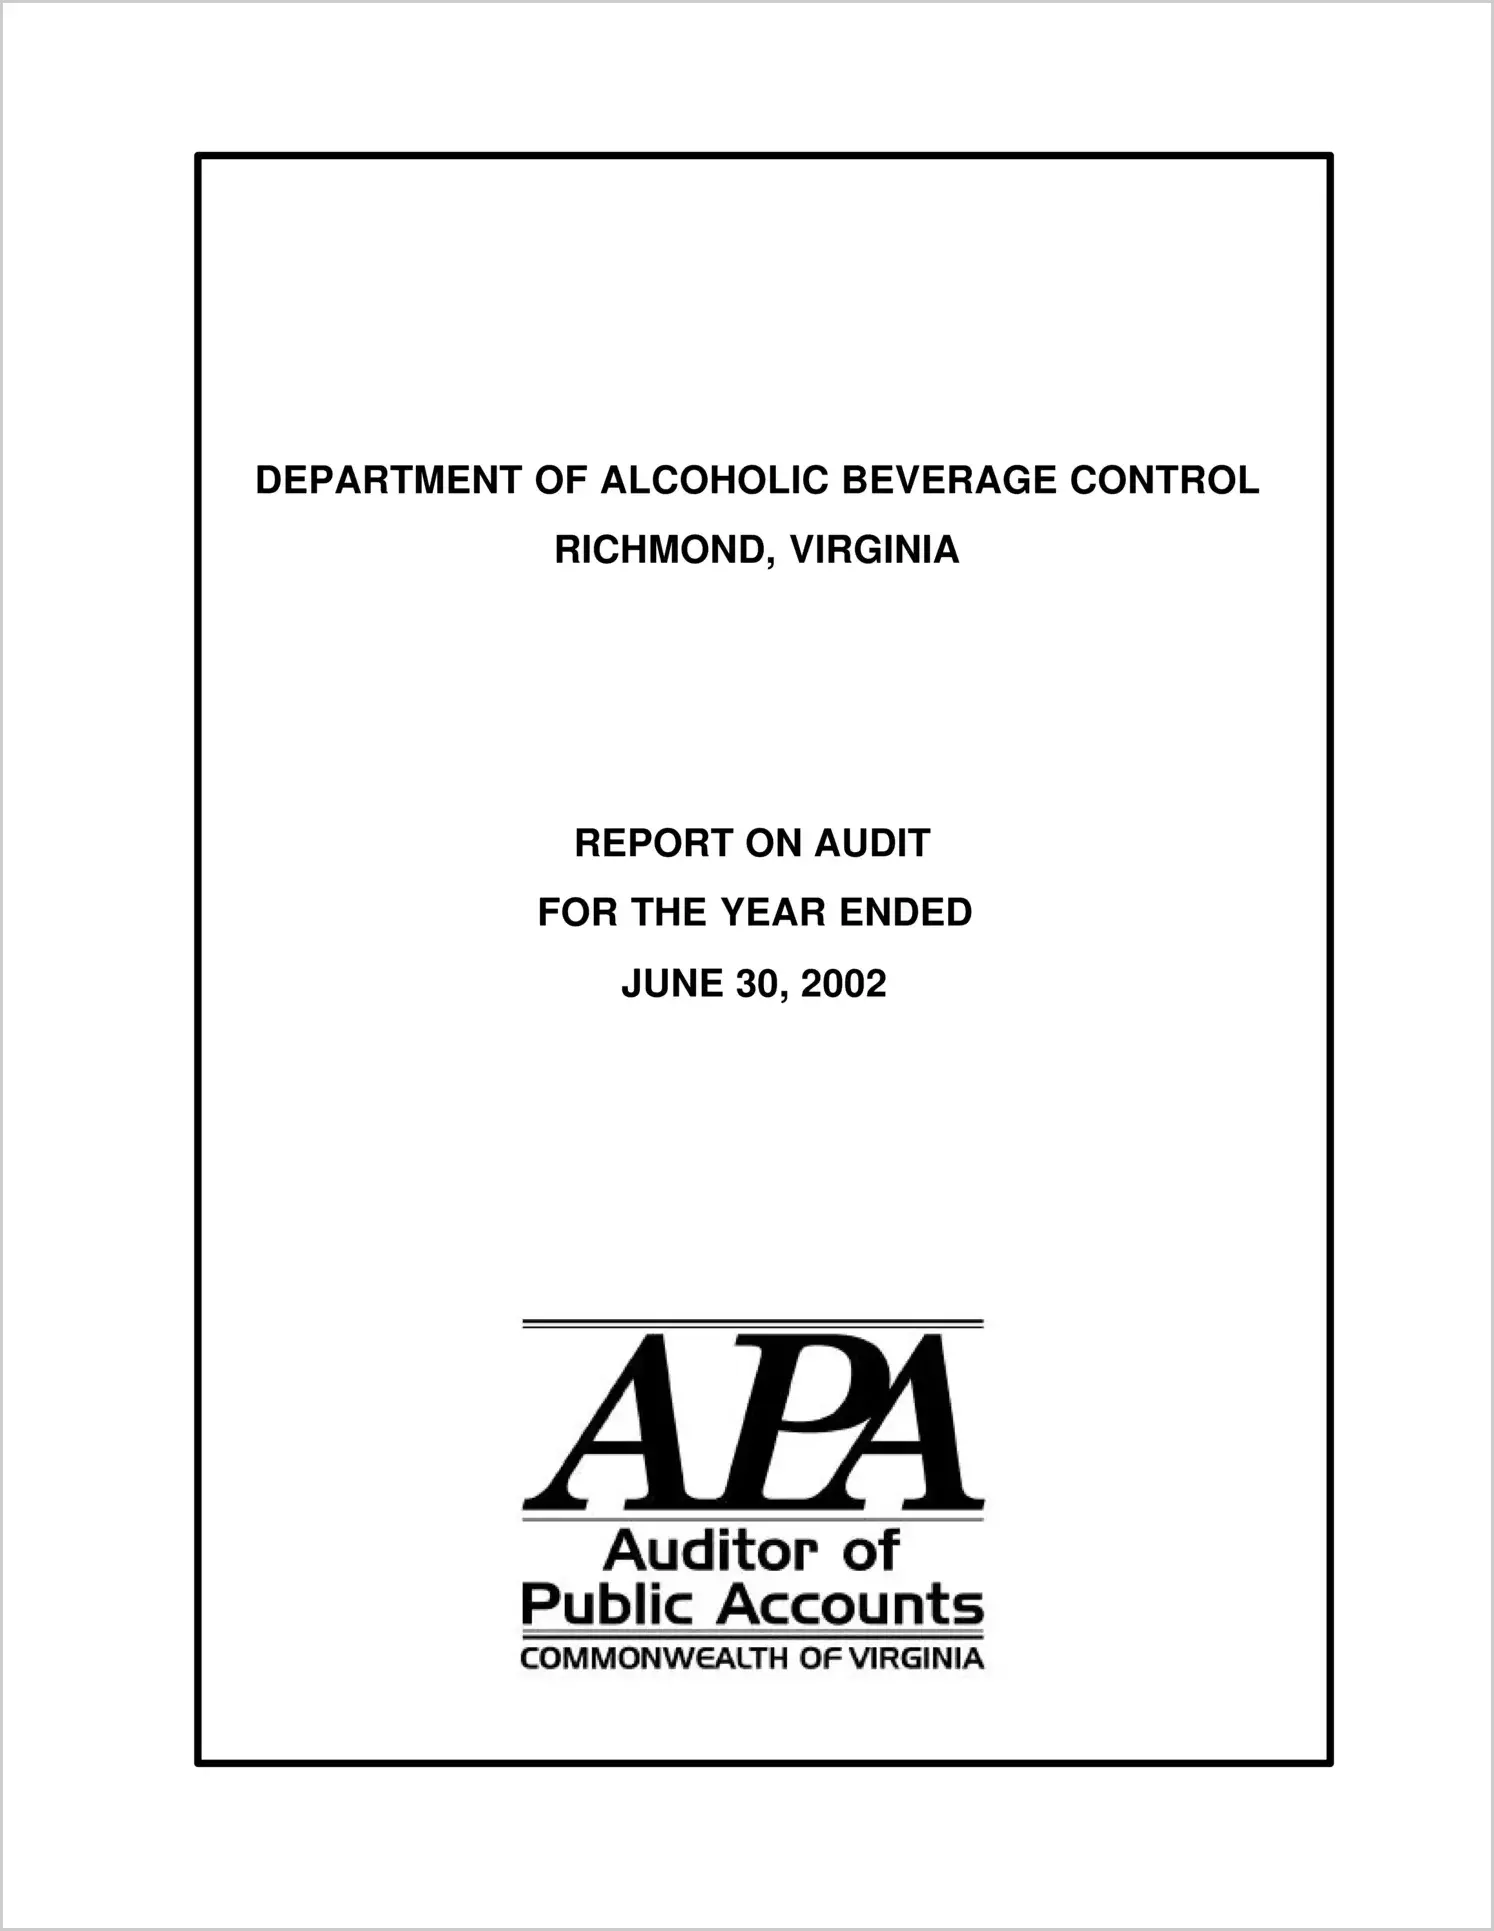 Department of Alcoholic Beverage Control for the year ended June 30, 2002